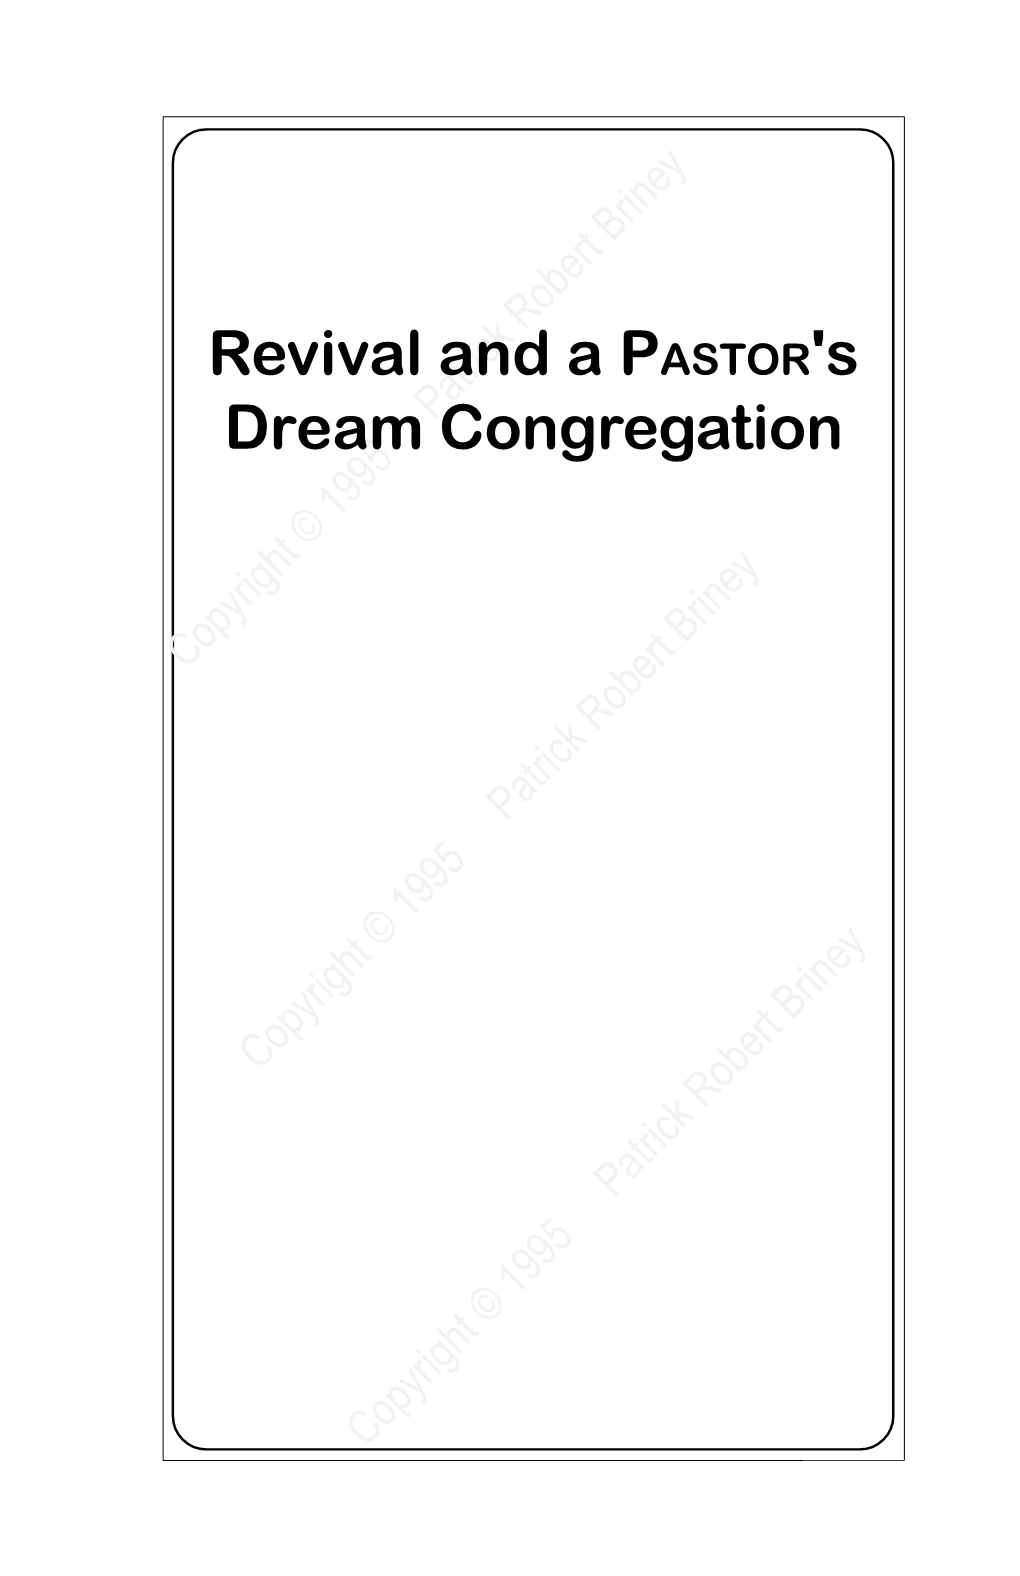 Revival and a Pastor's Dream Congregation